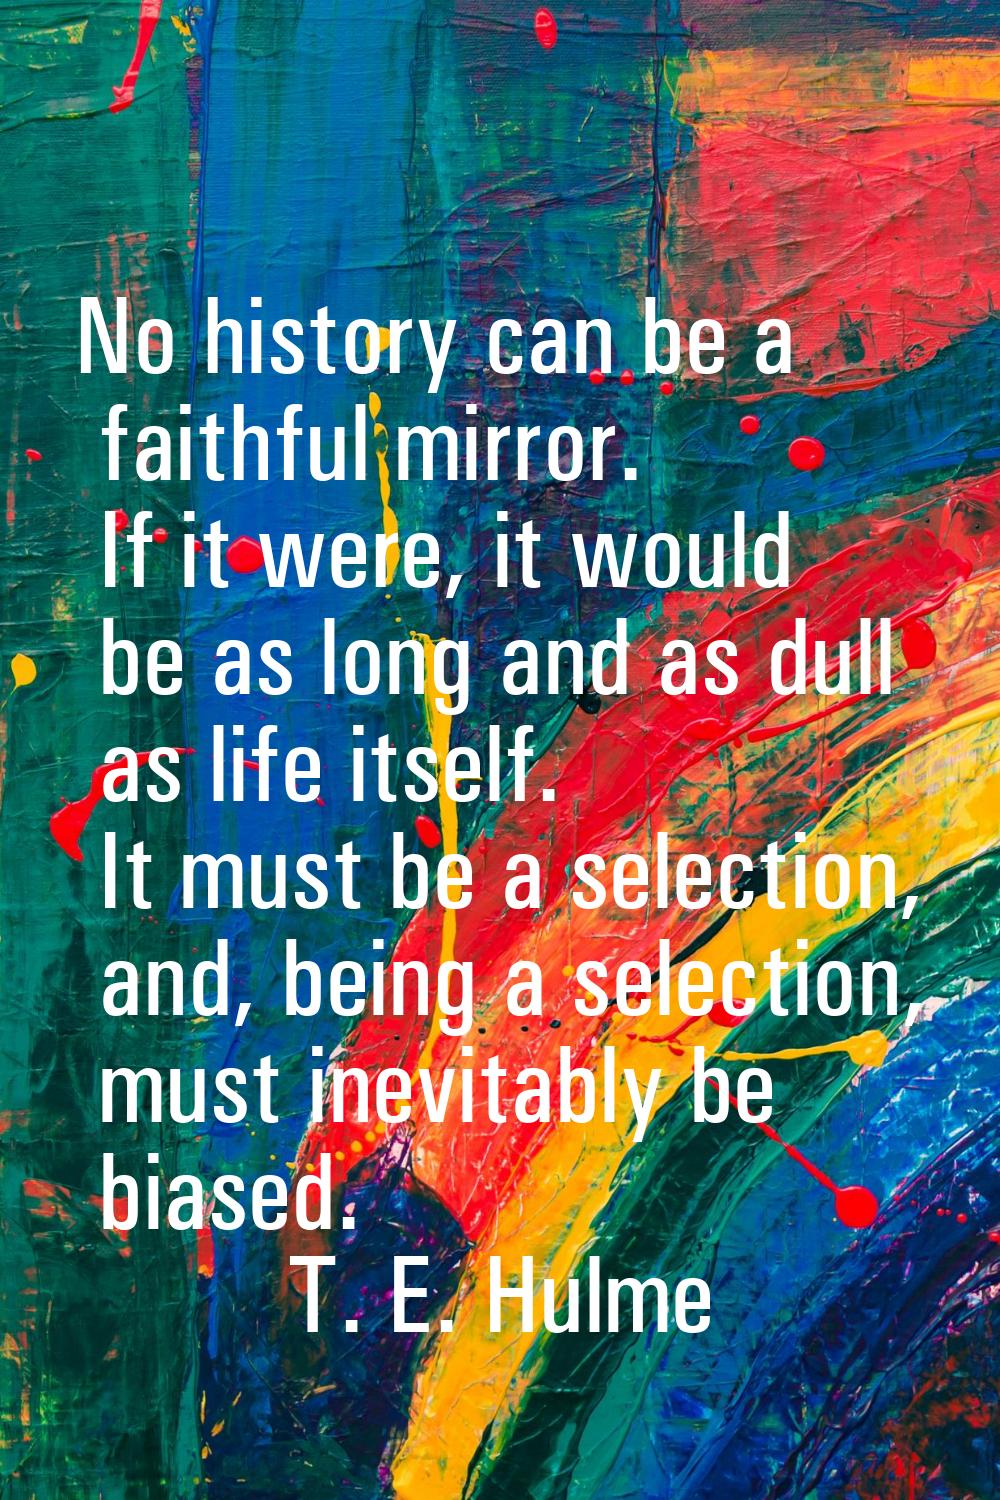 No history can be a faithful mirror. If it were, it would be as long and as dull as life itself. It